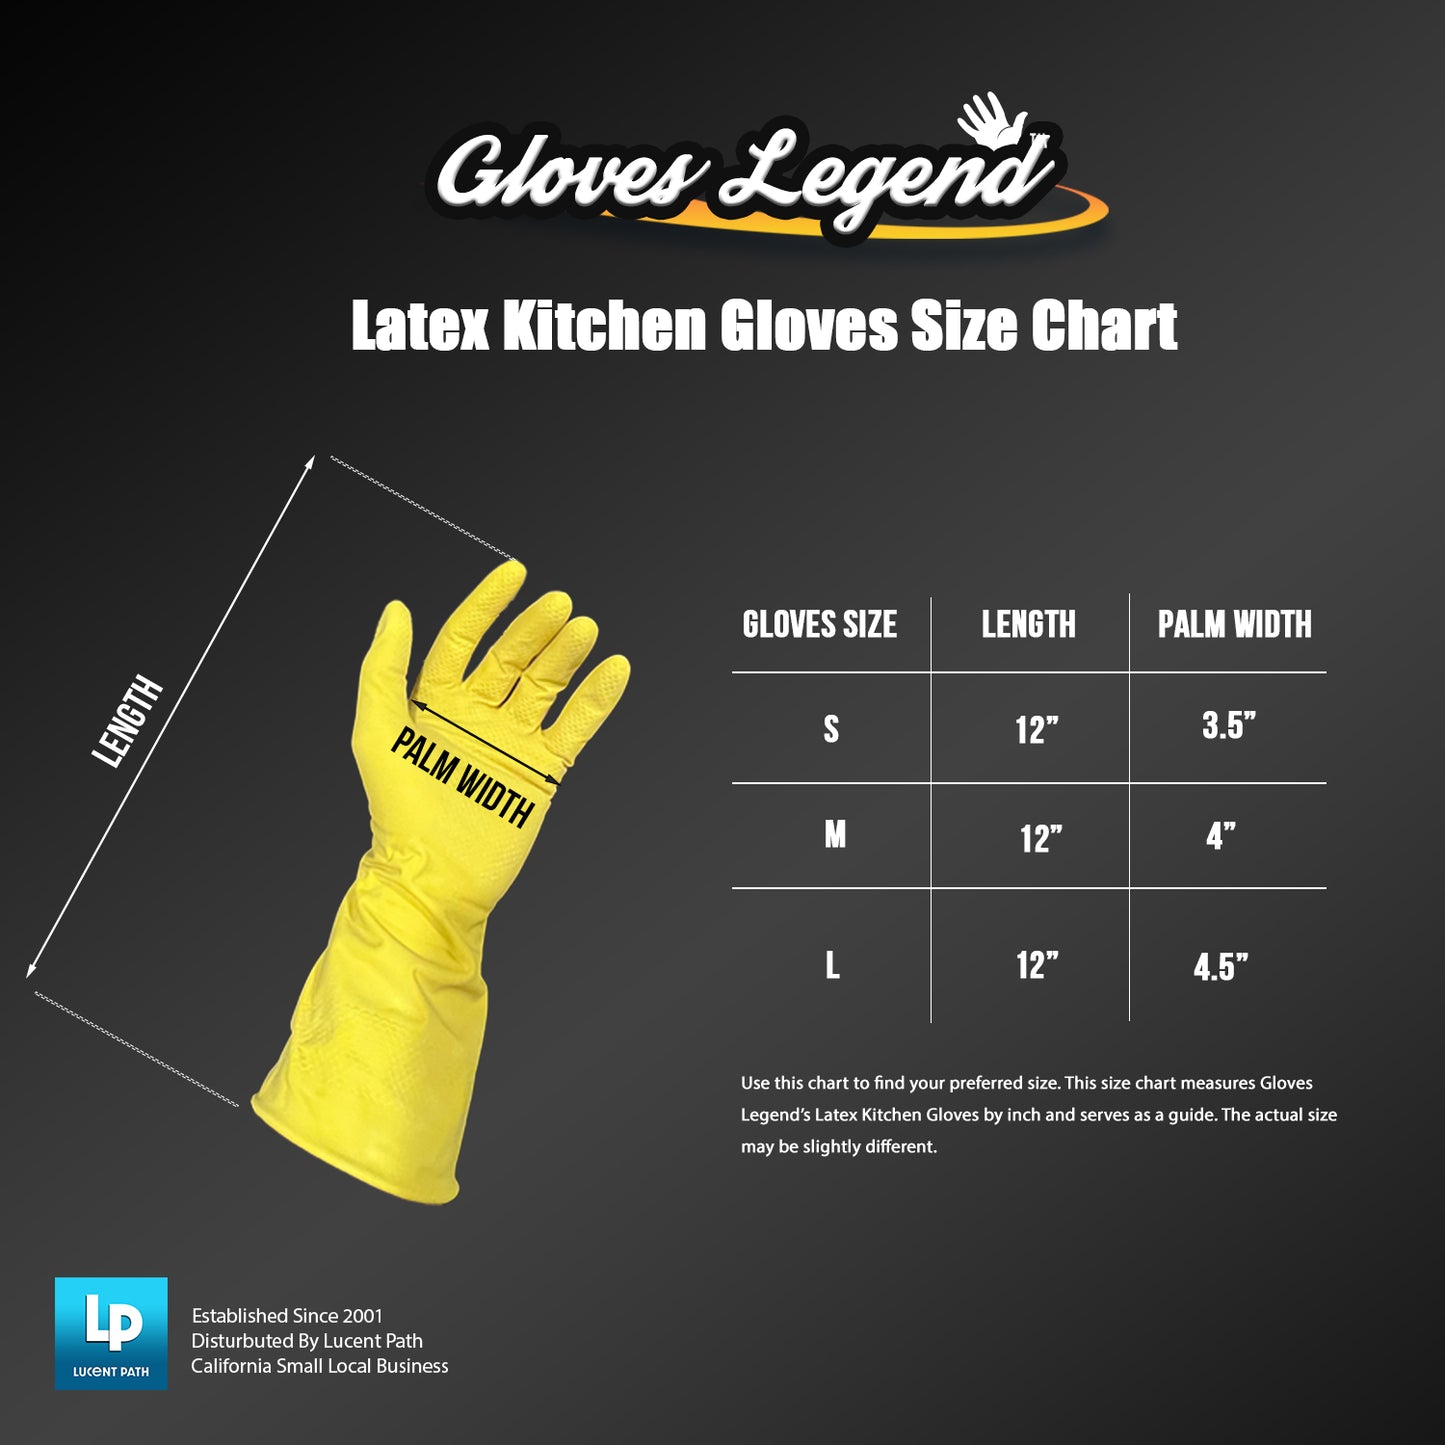 Large - 6 Pairs (12 Gloves) 12" Gloves Legend Yellow Latex Household Kitchen Cleaning Dishwashing Gloves - 18 mil